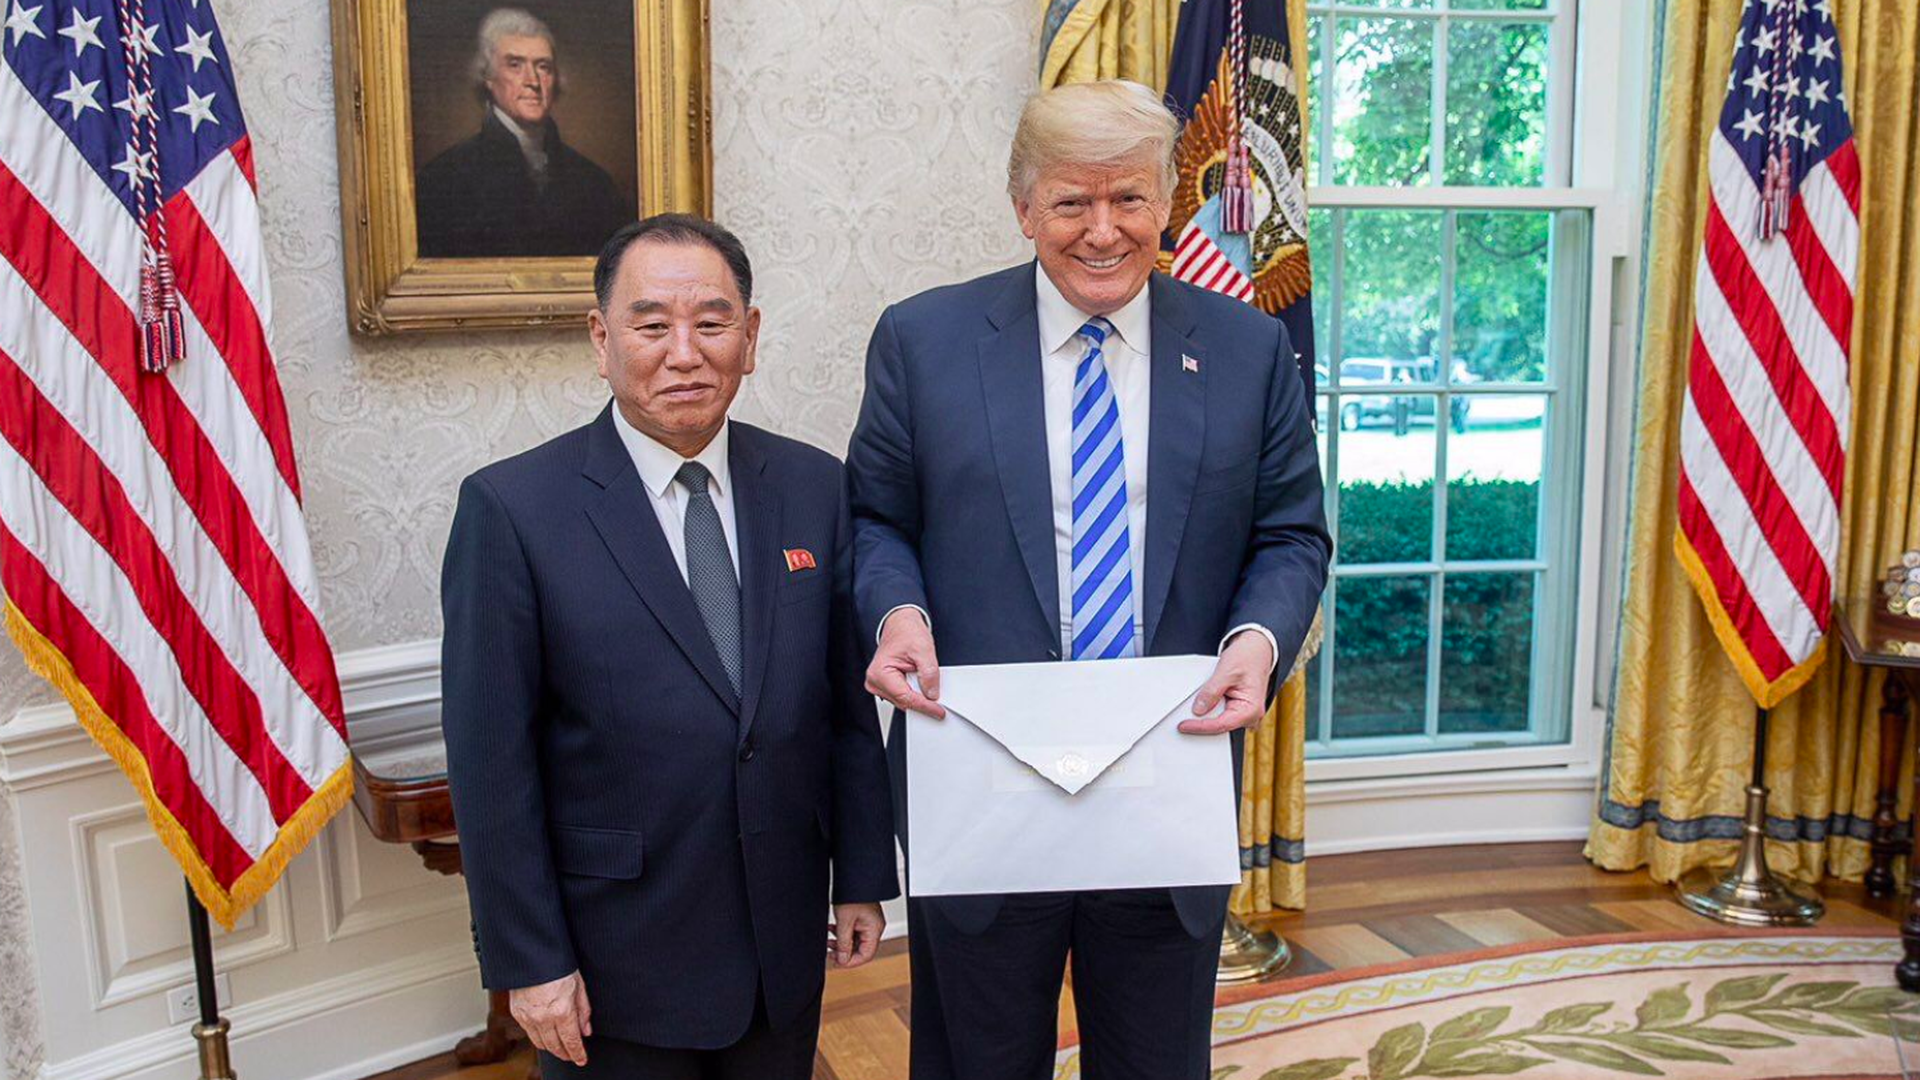 Trump holds a letter from Kim